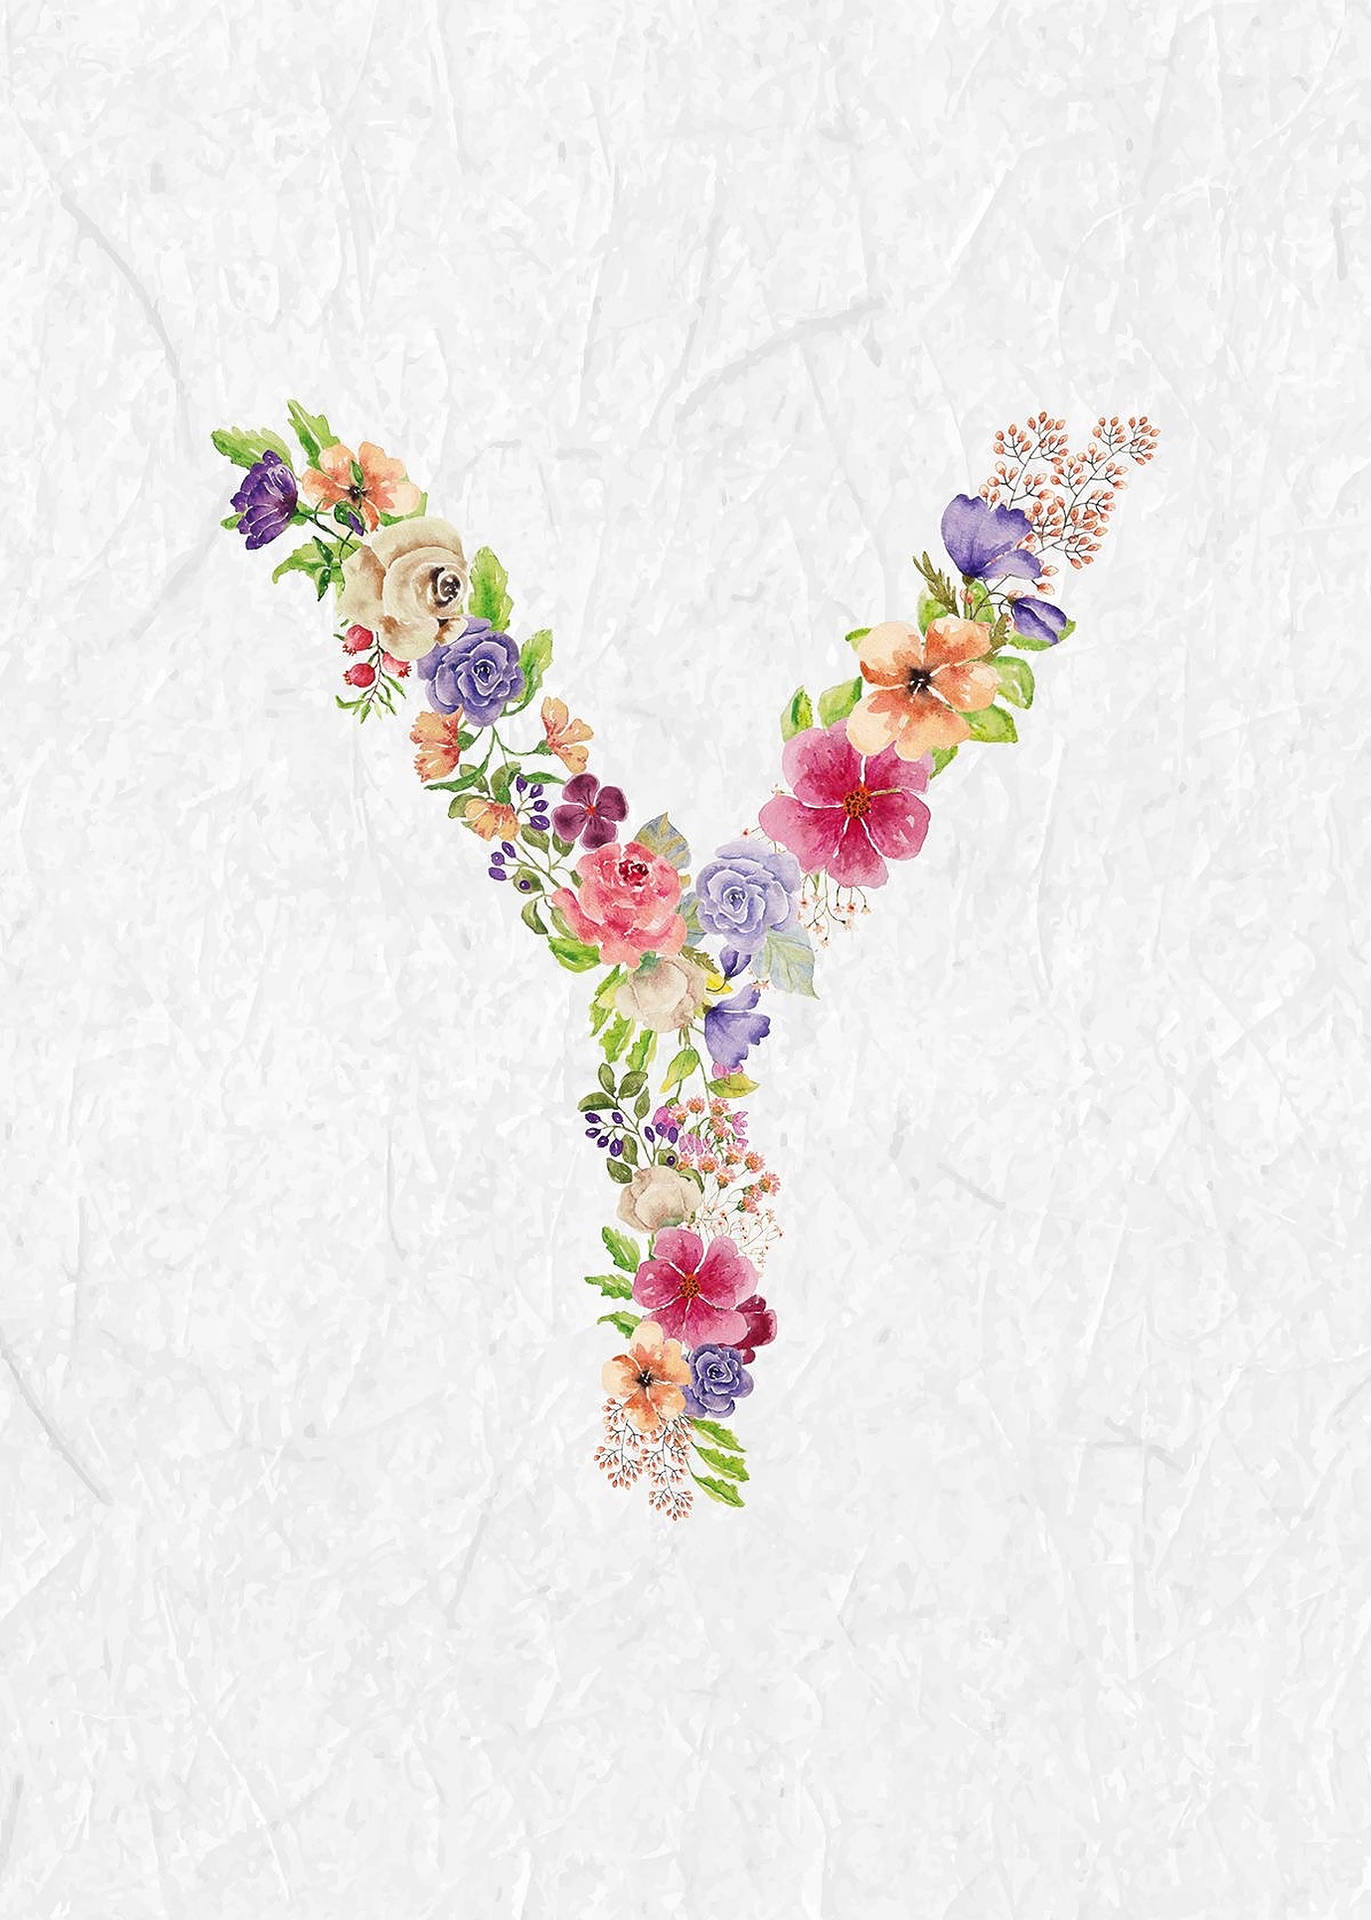 Free Letter Y Wallpaper Downloads, [100+] Letter Y Wallpapers for FREE |  